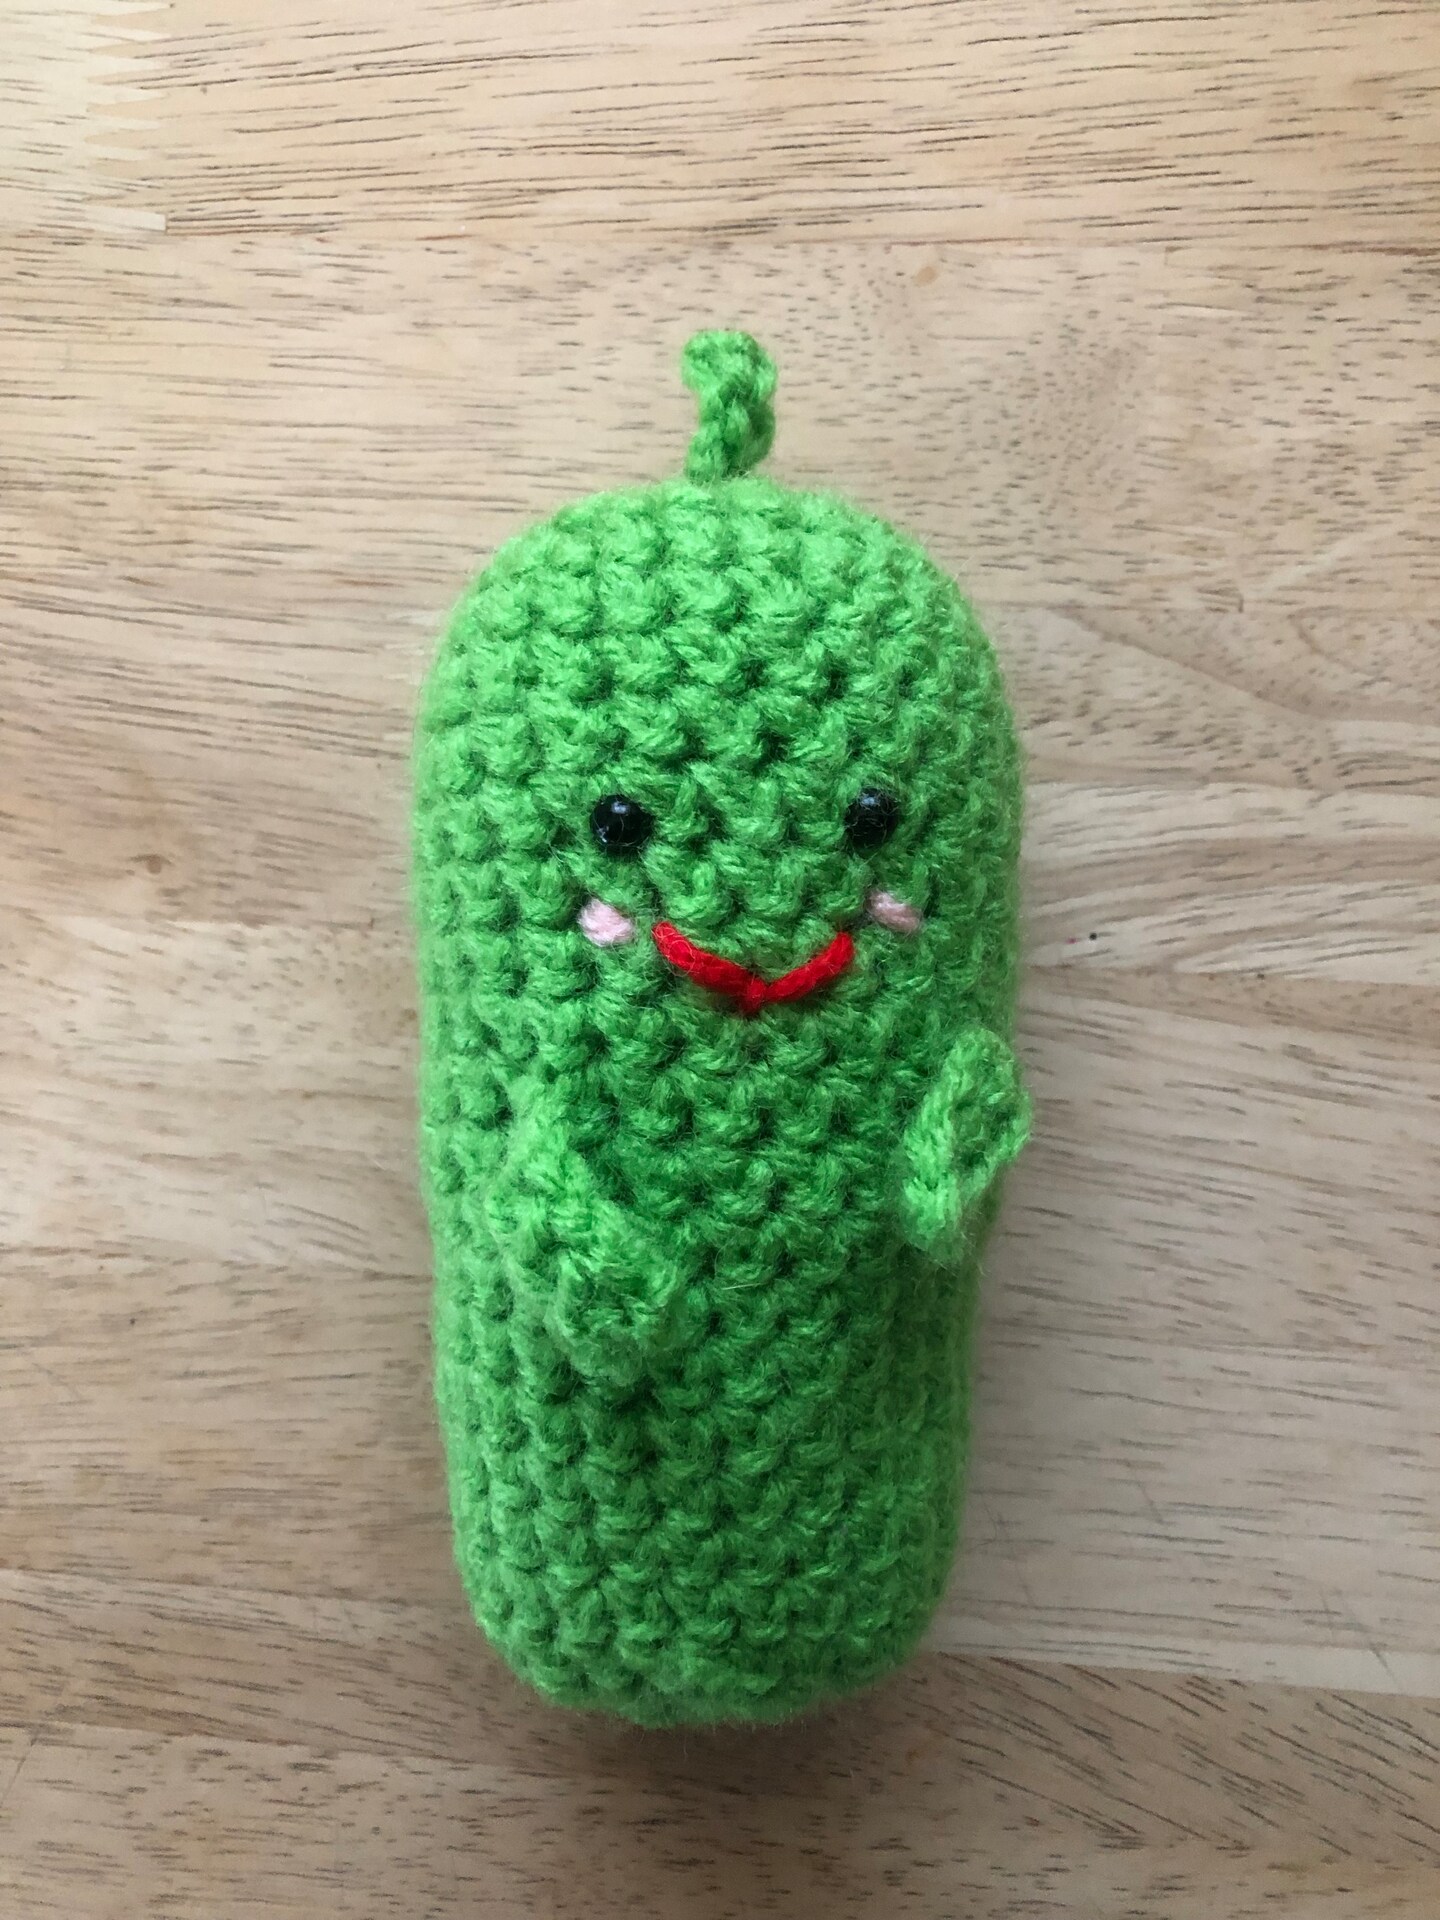  Emotional Support Pickle,Emotional Support Pickle Emotional  Support Crochet Emotional Support （10 Piece Set） (with Base) : Toys & Games